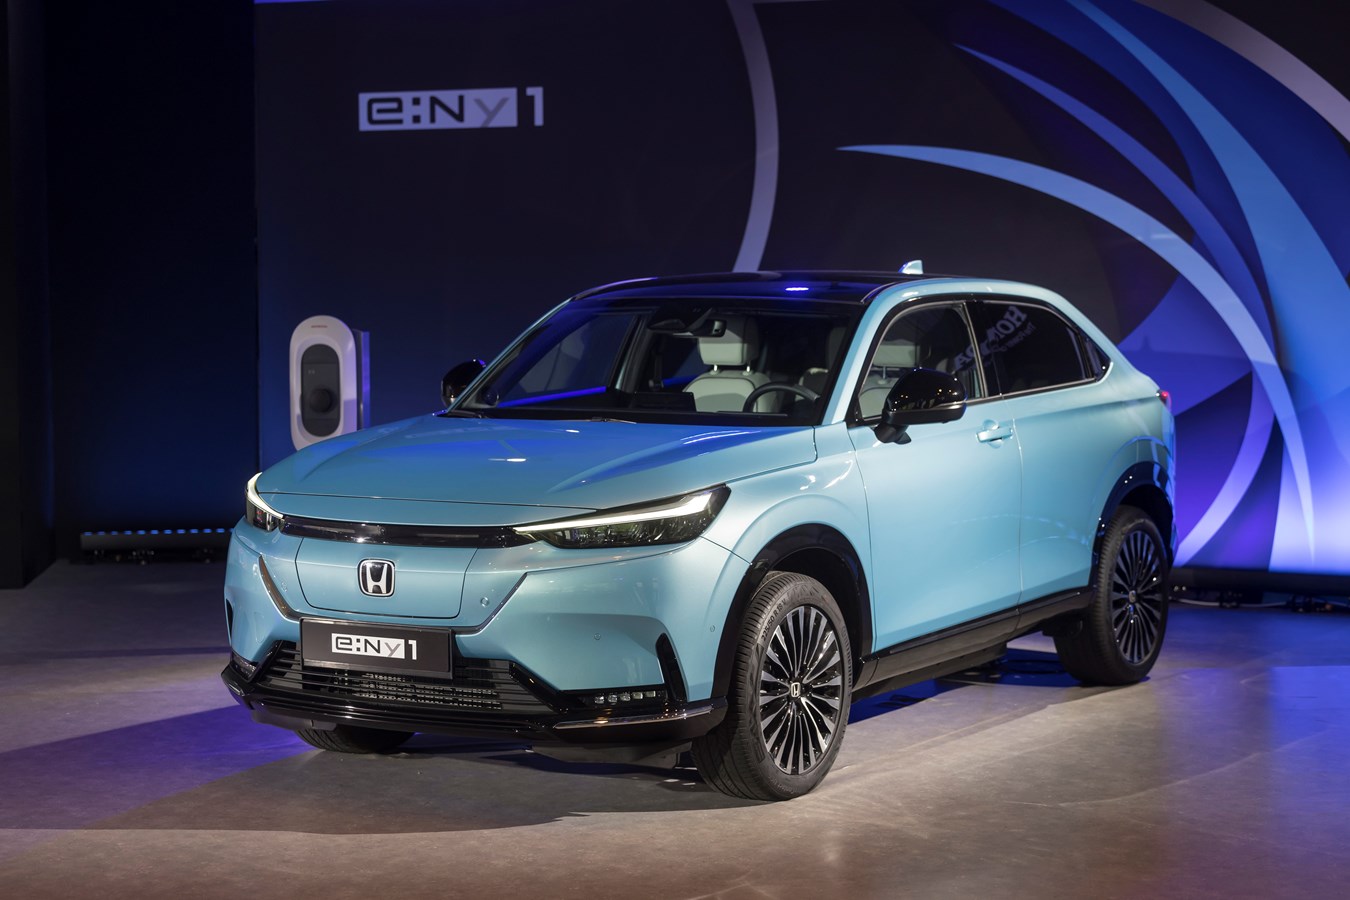 438855_HONDA_SHOWCASES_AMBITIOUS_NEW_RANGE_OF_ELECTRIFIED_PRODUCTS_AND_SERVICES.jpg